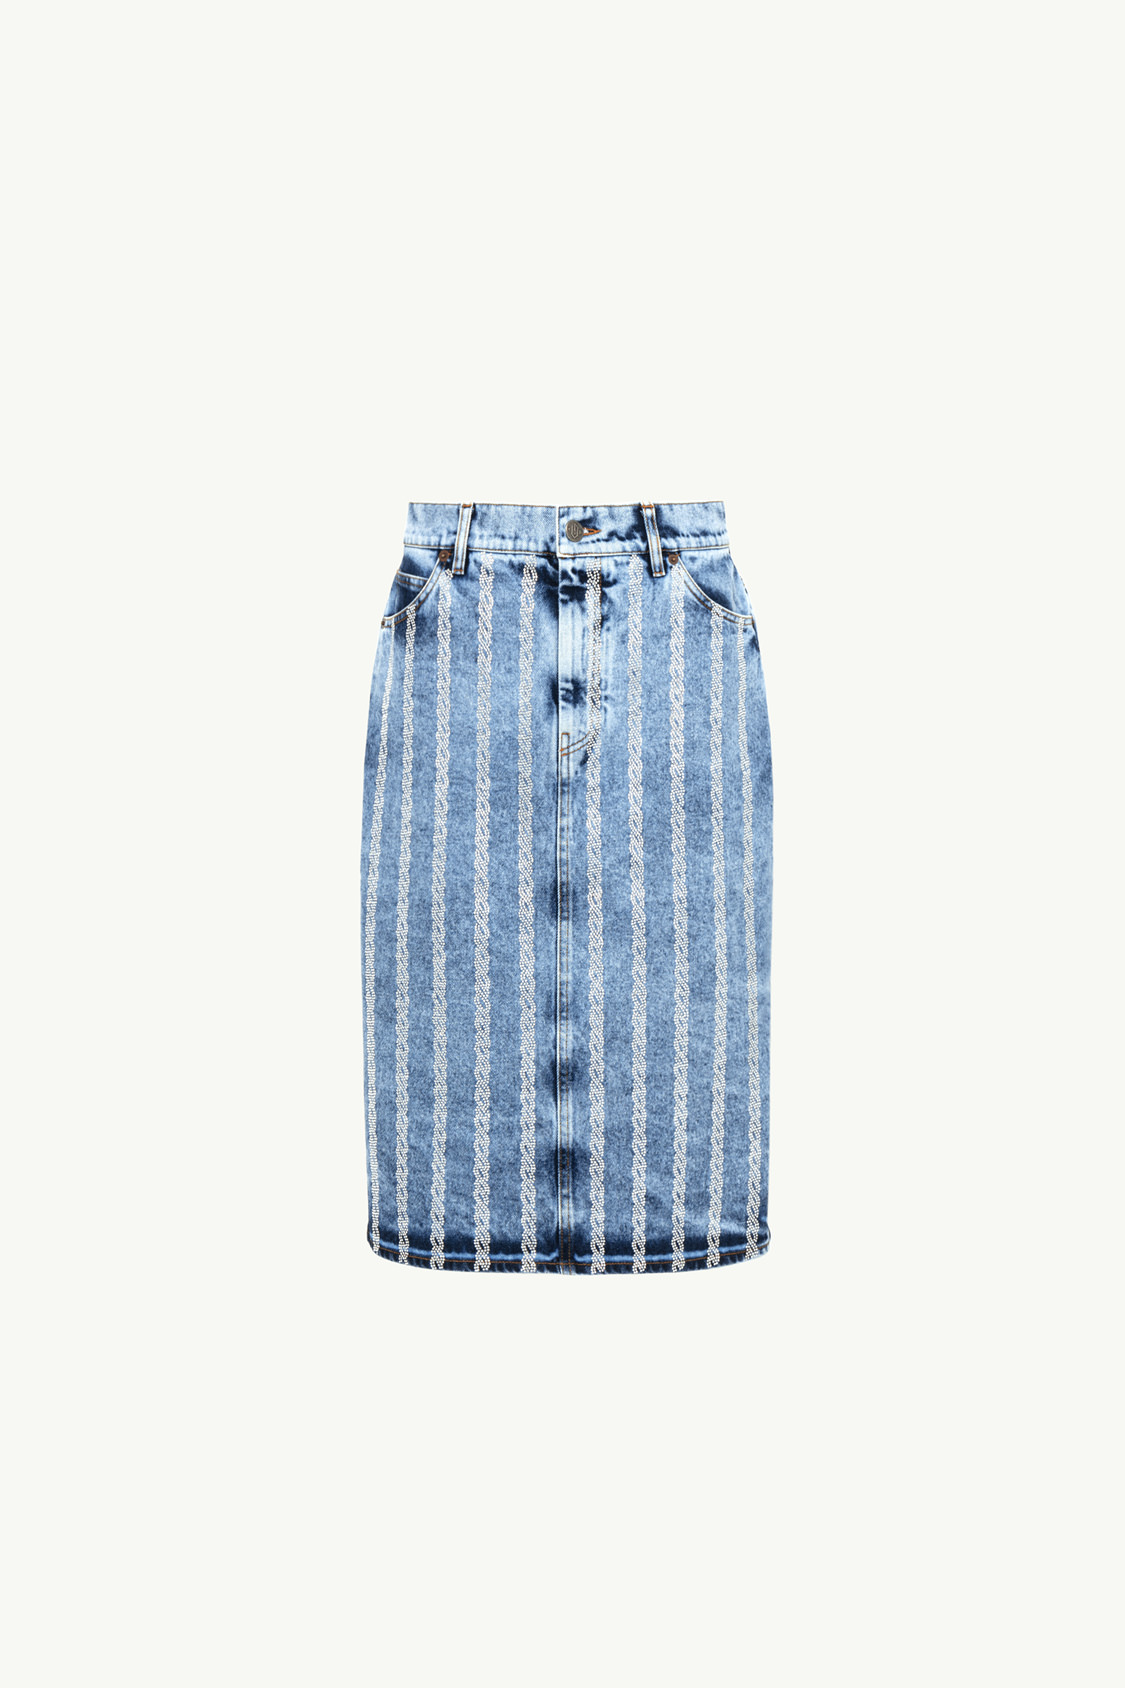 MARBLED DENIM SKIRT WITH CRYSTALS